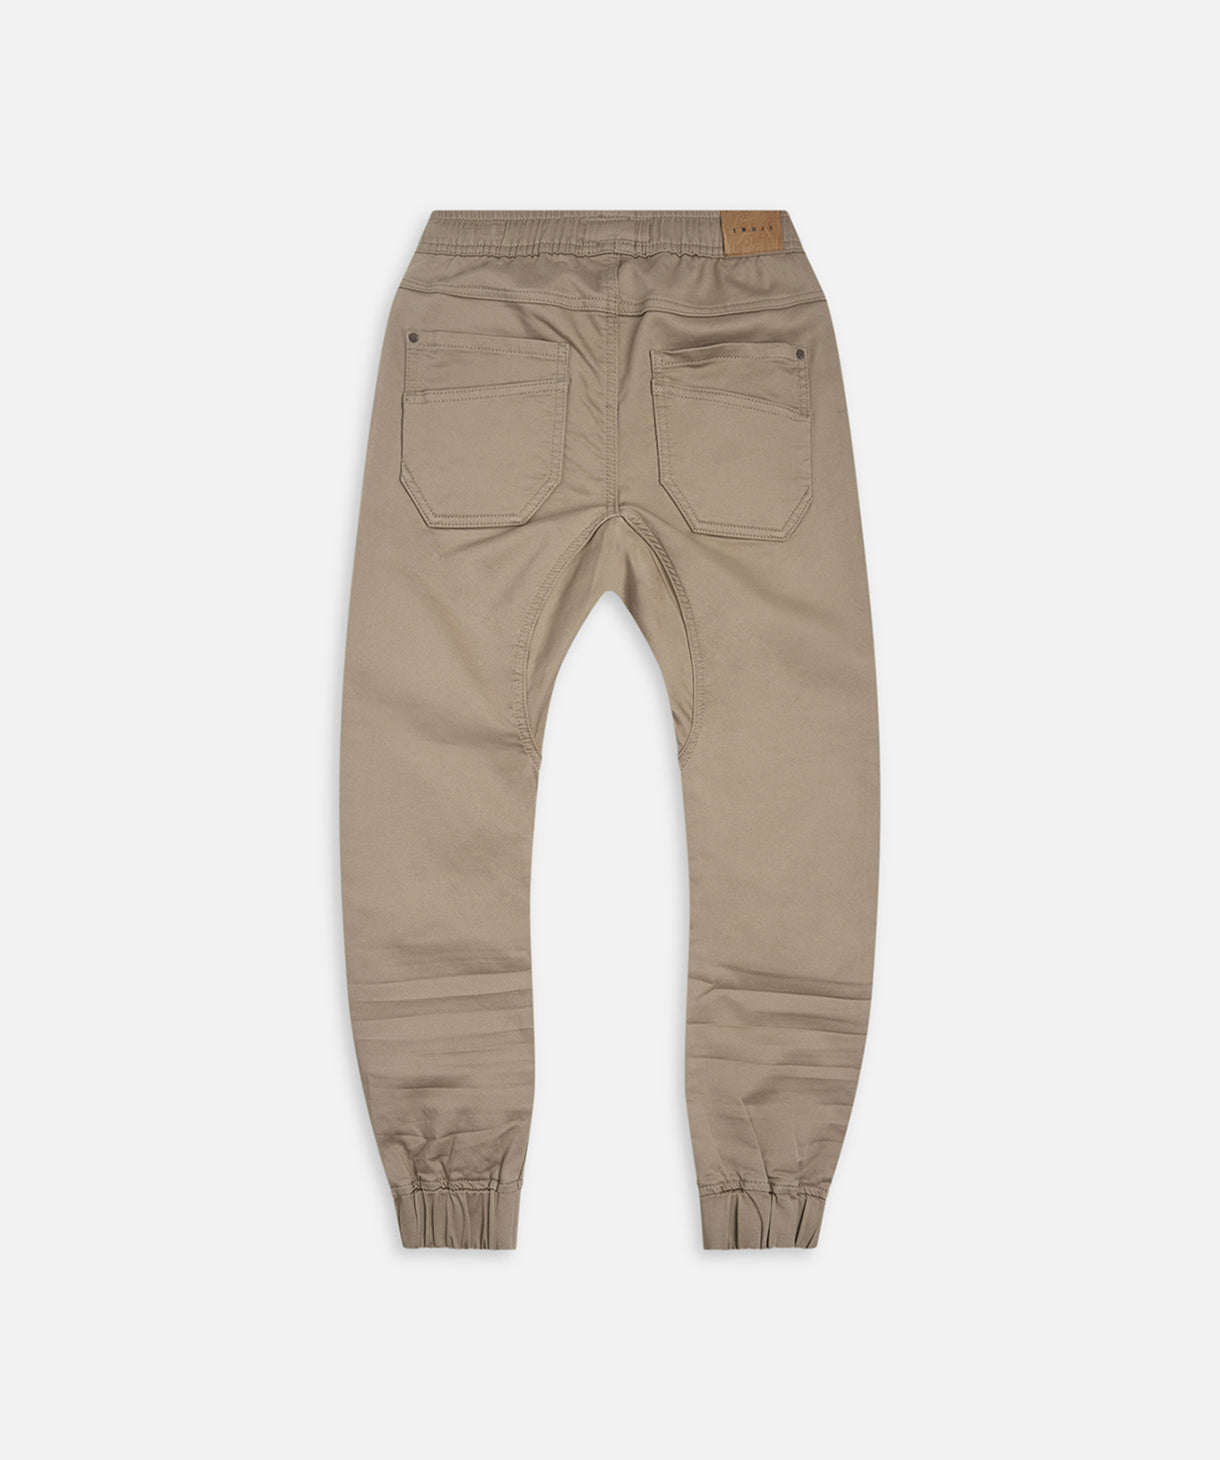 Indie Kids By Industrie Arched Drifter Pant (8-16 Years) In Dark